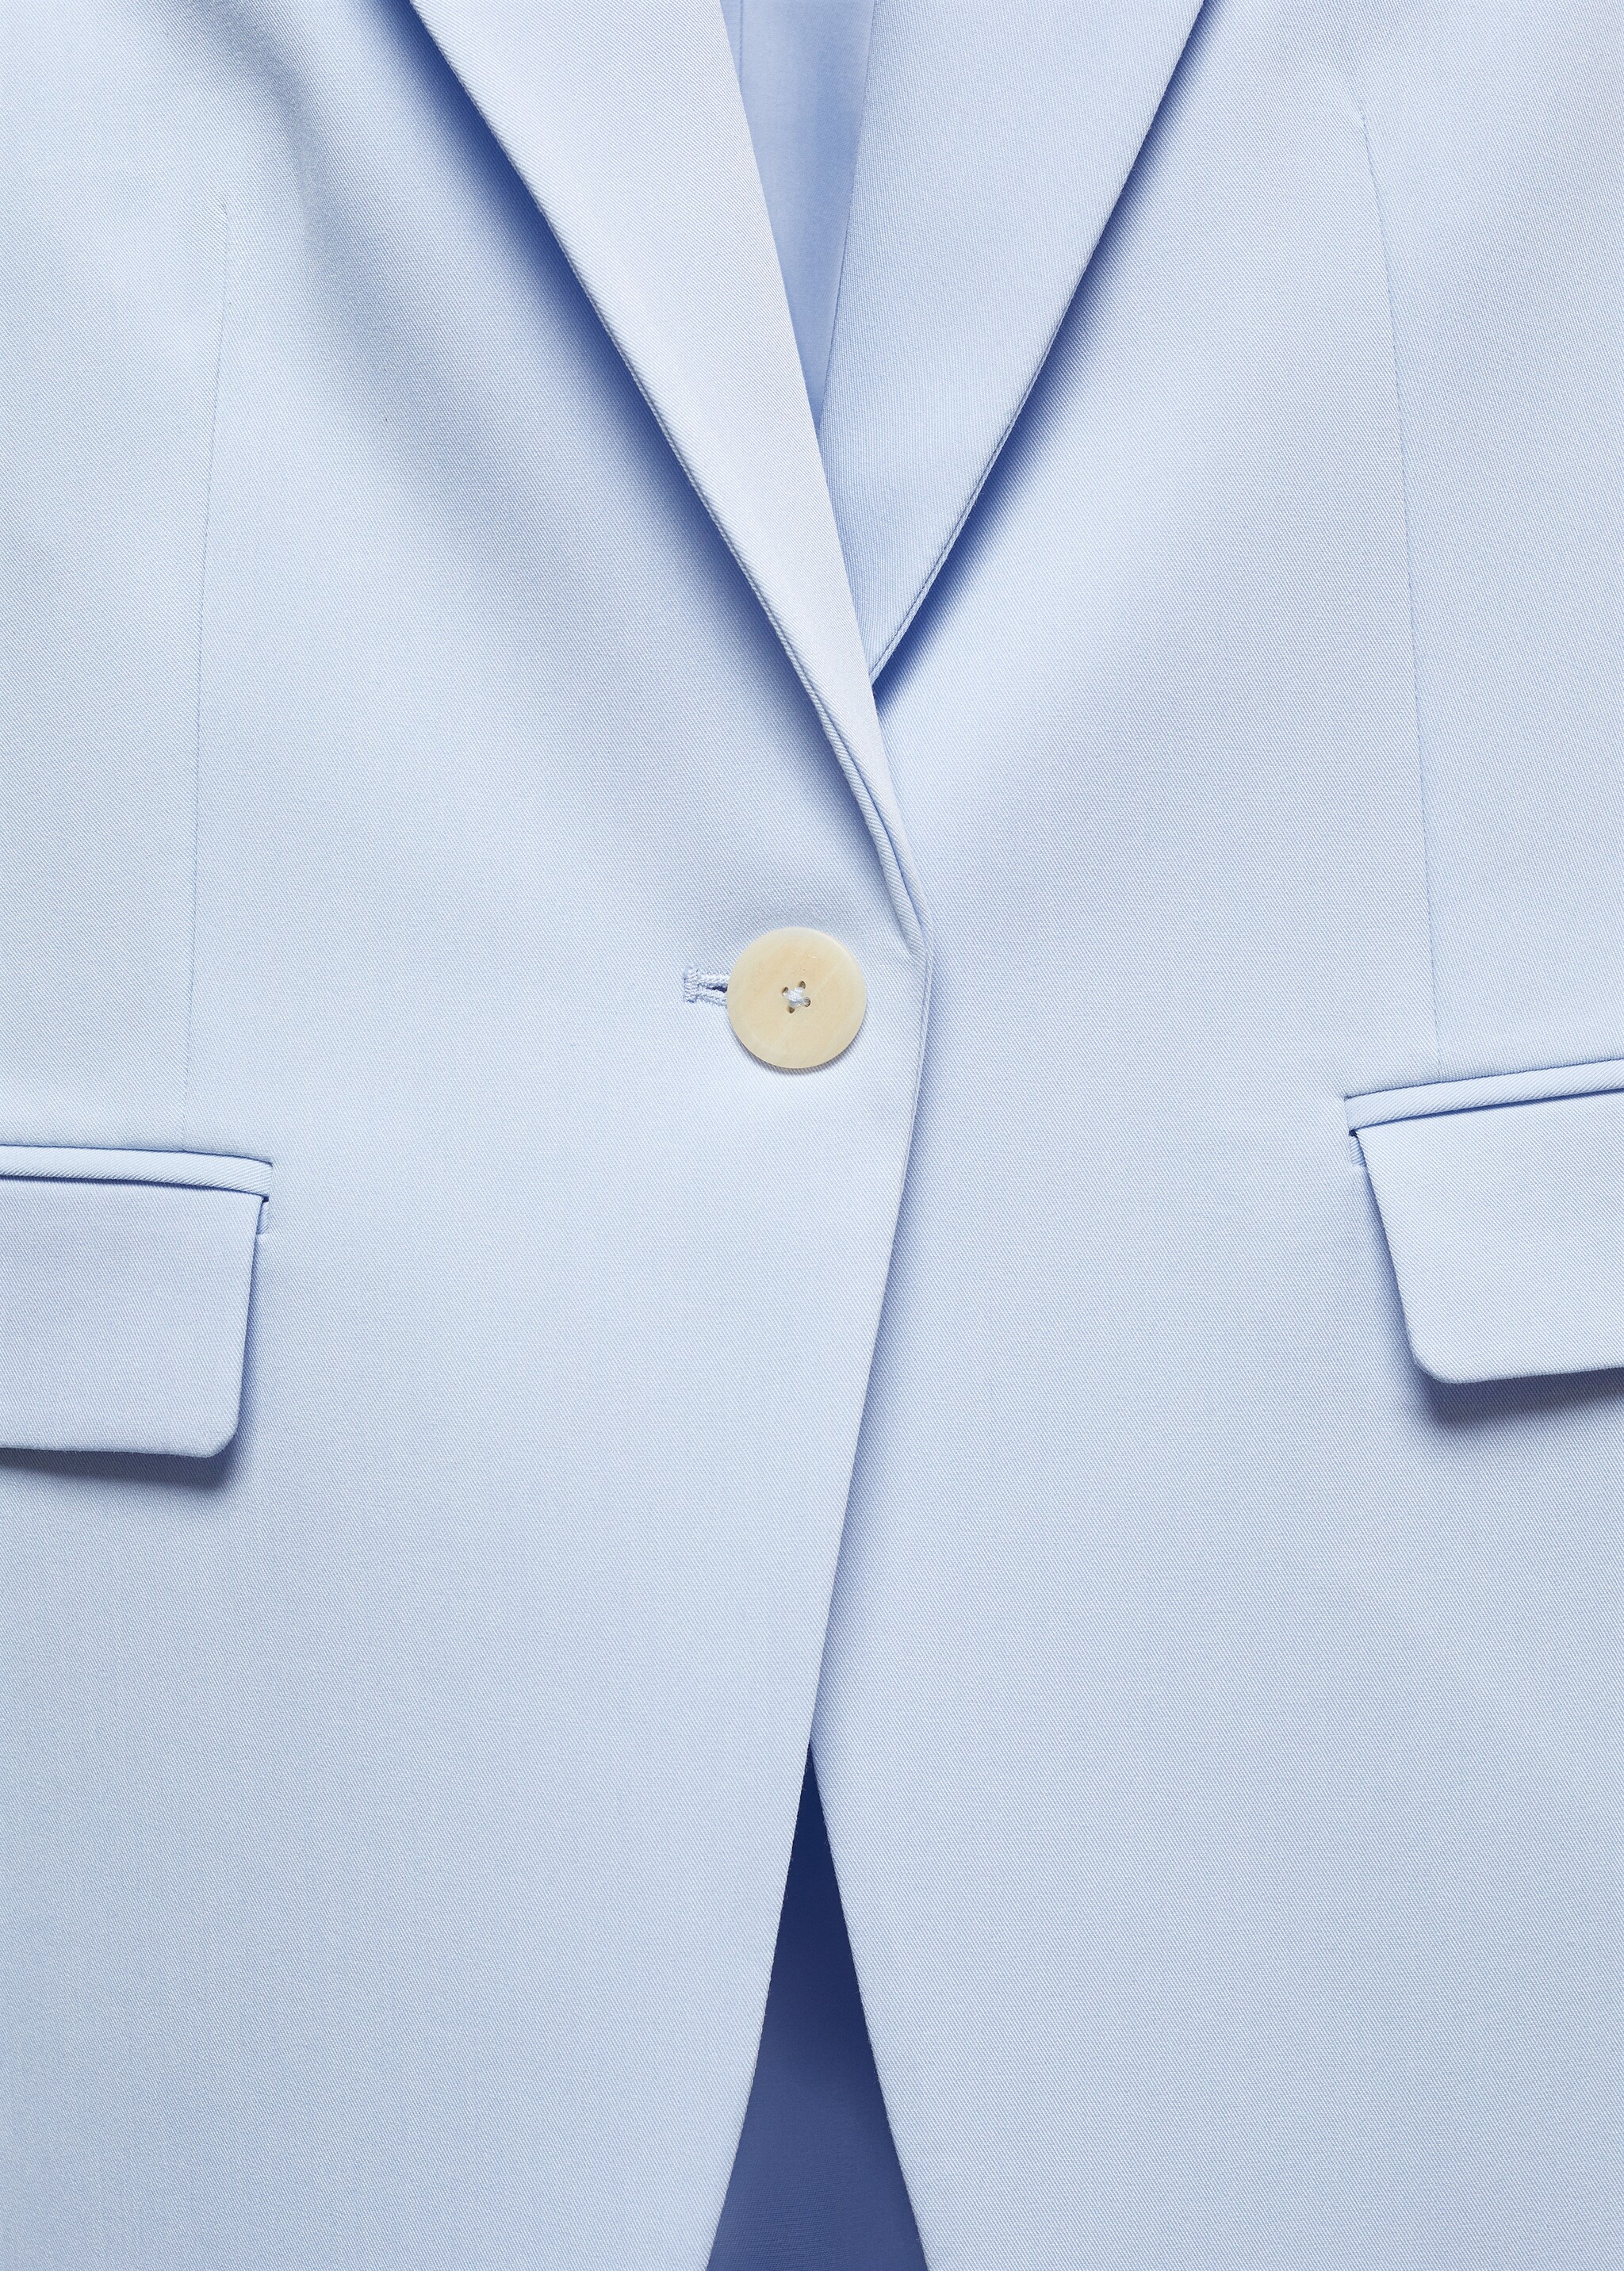 Fitted suit jacket - Details of the article 8